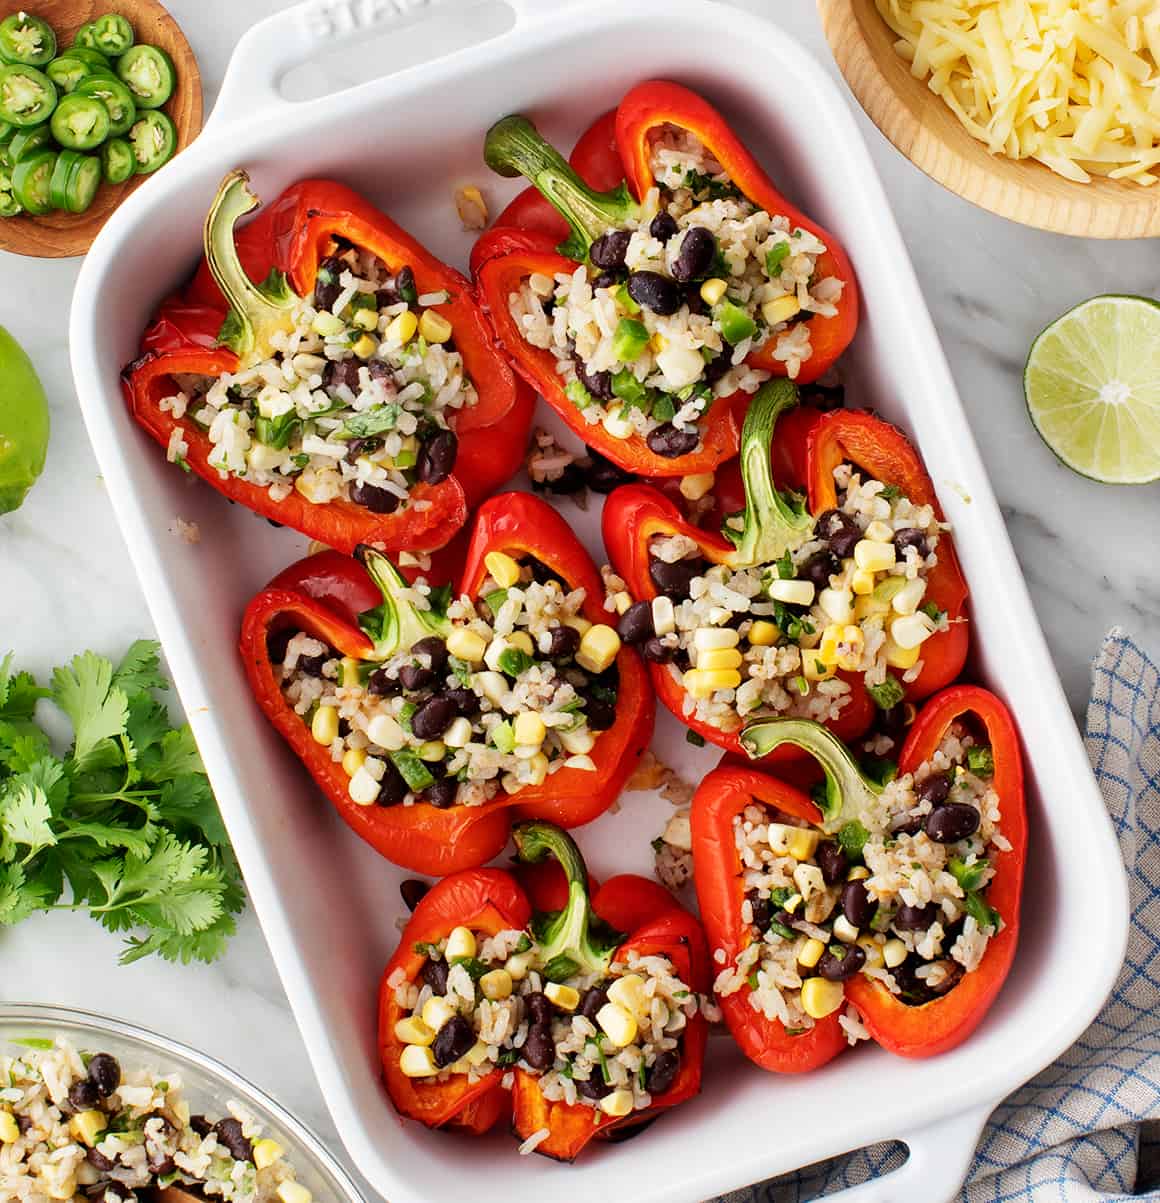 Stuffed Peppers Recipe: A Colorful and Flavorful Dish